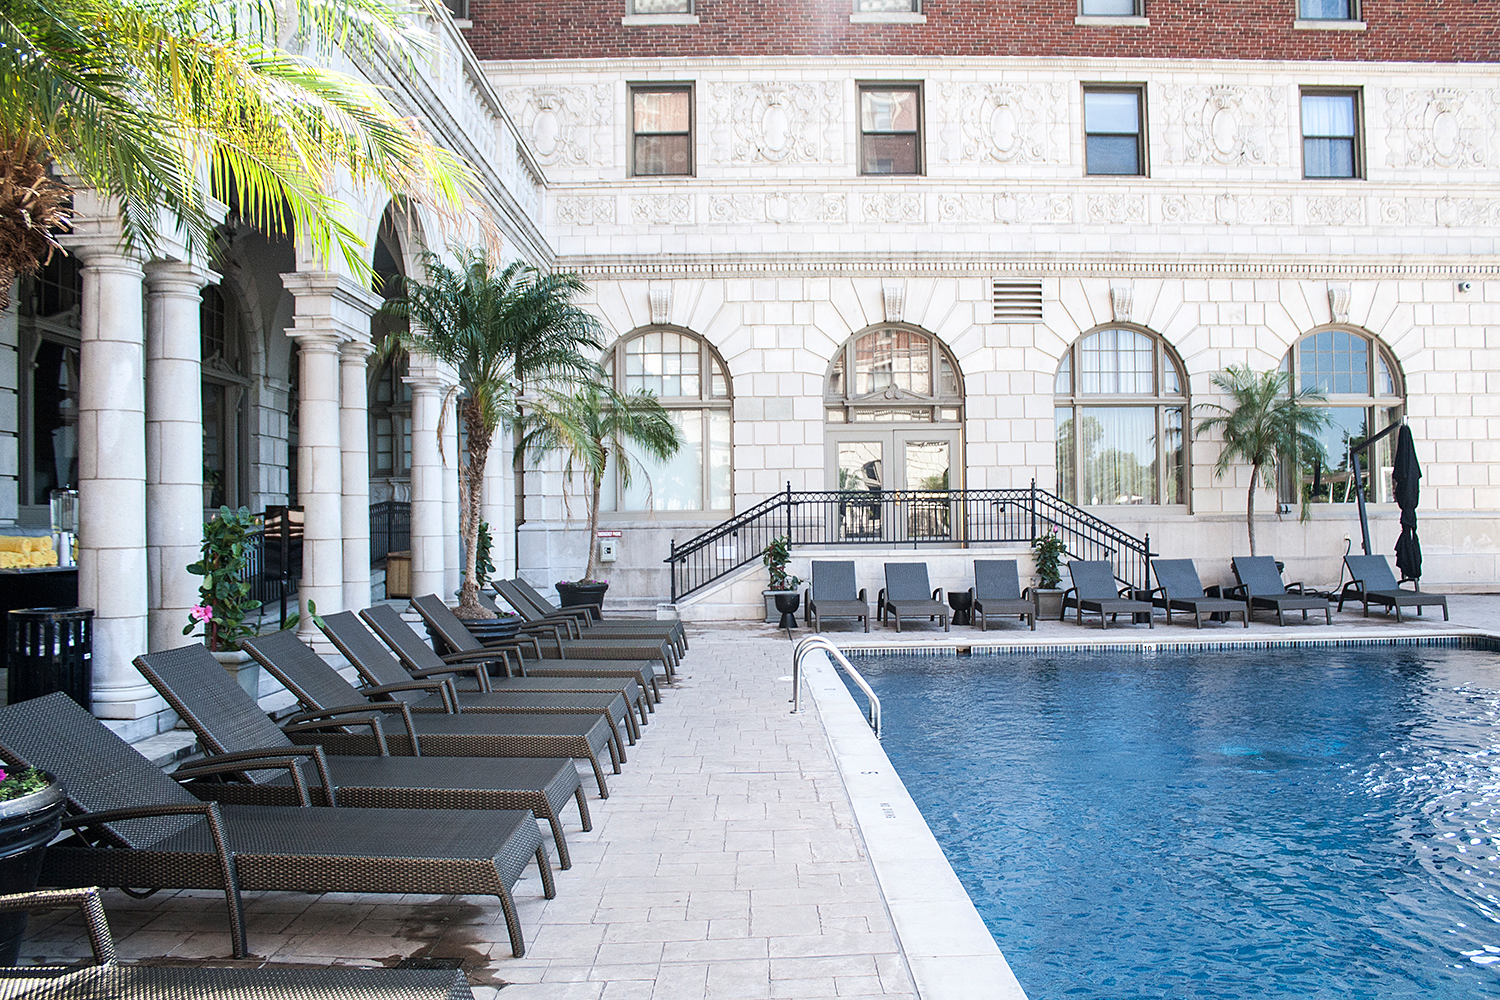 01stlouis-chaseparkplaza-hotel-pool-travel-style